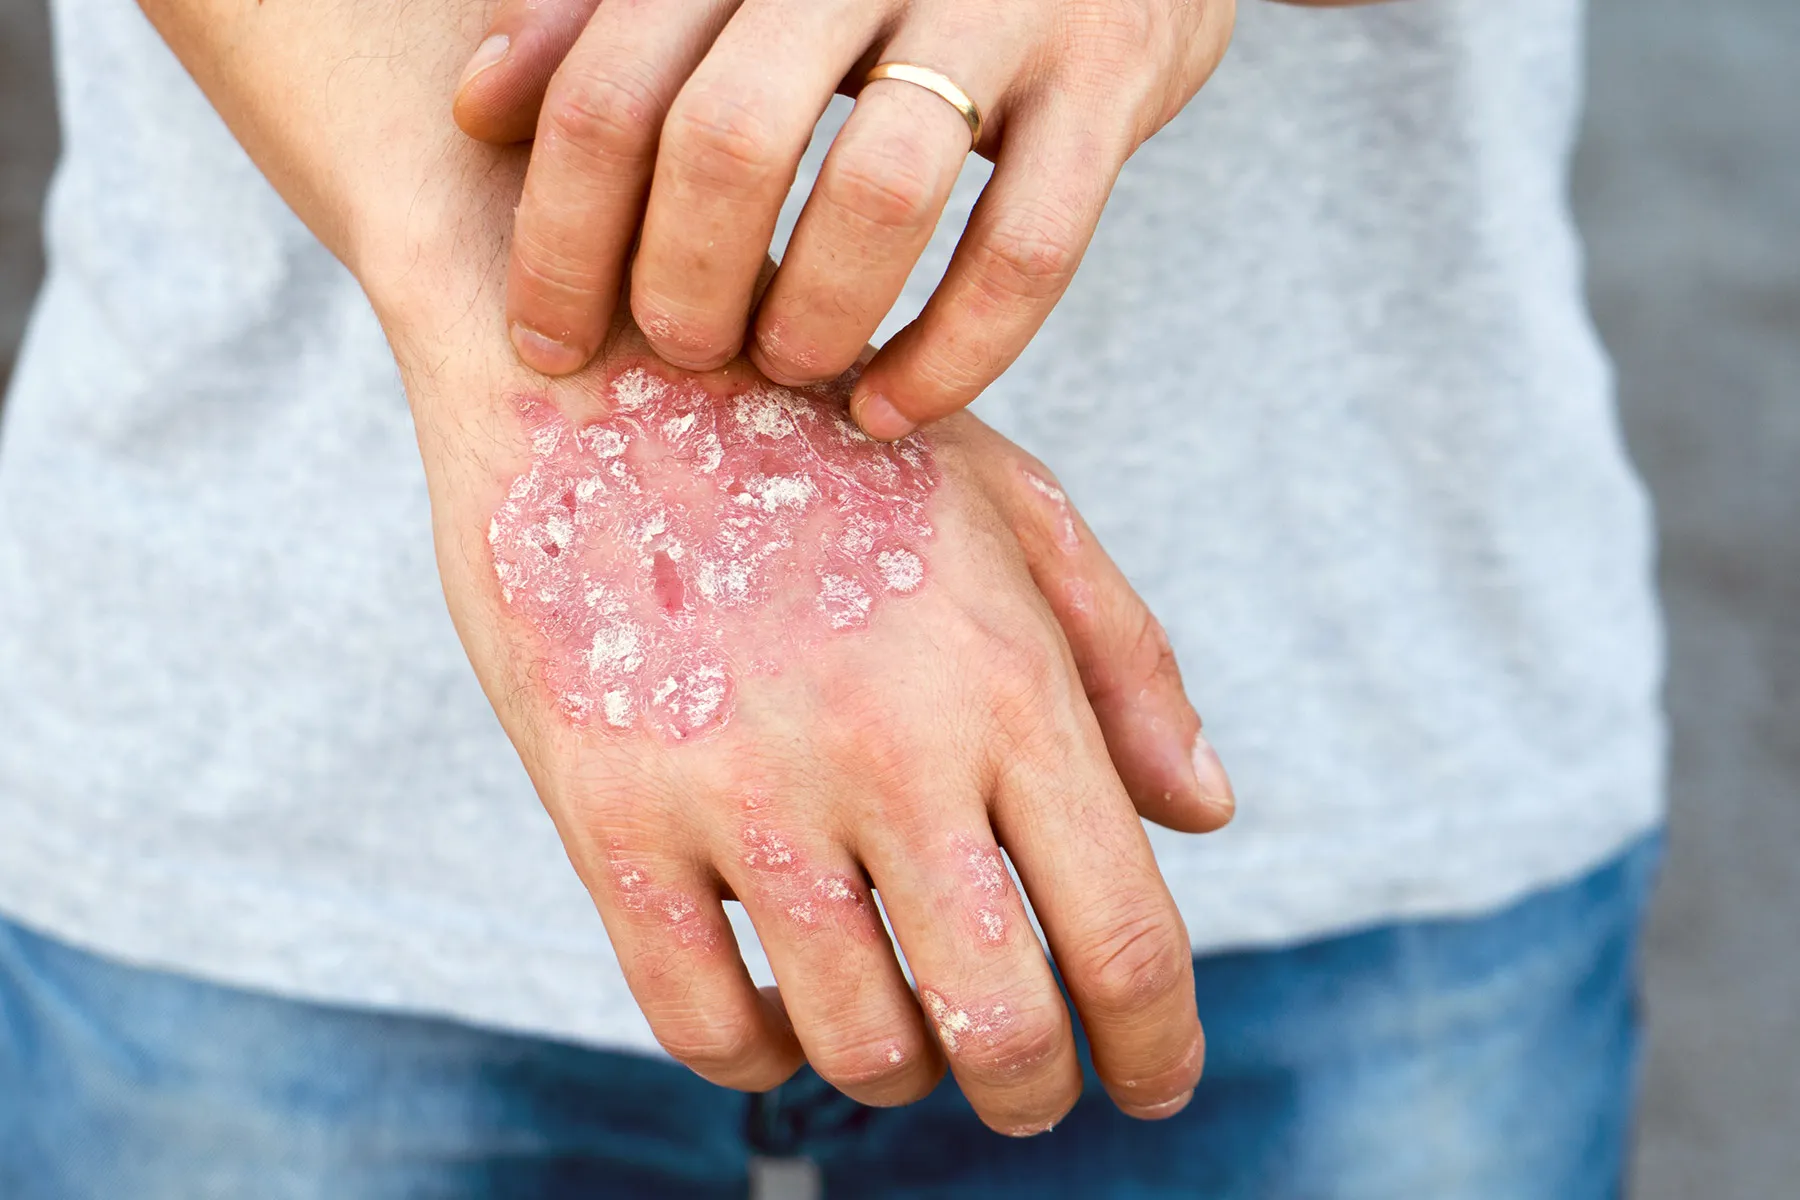 psoriasis worse after pregnancy